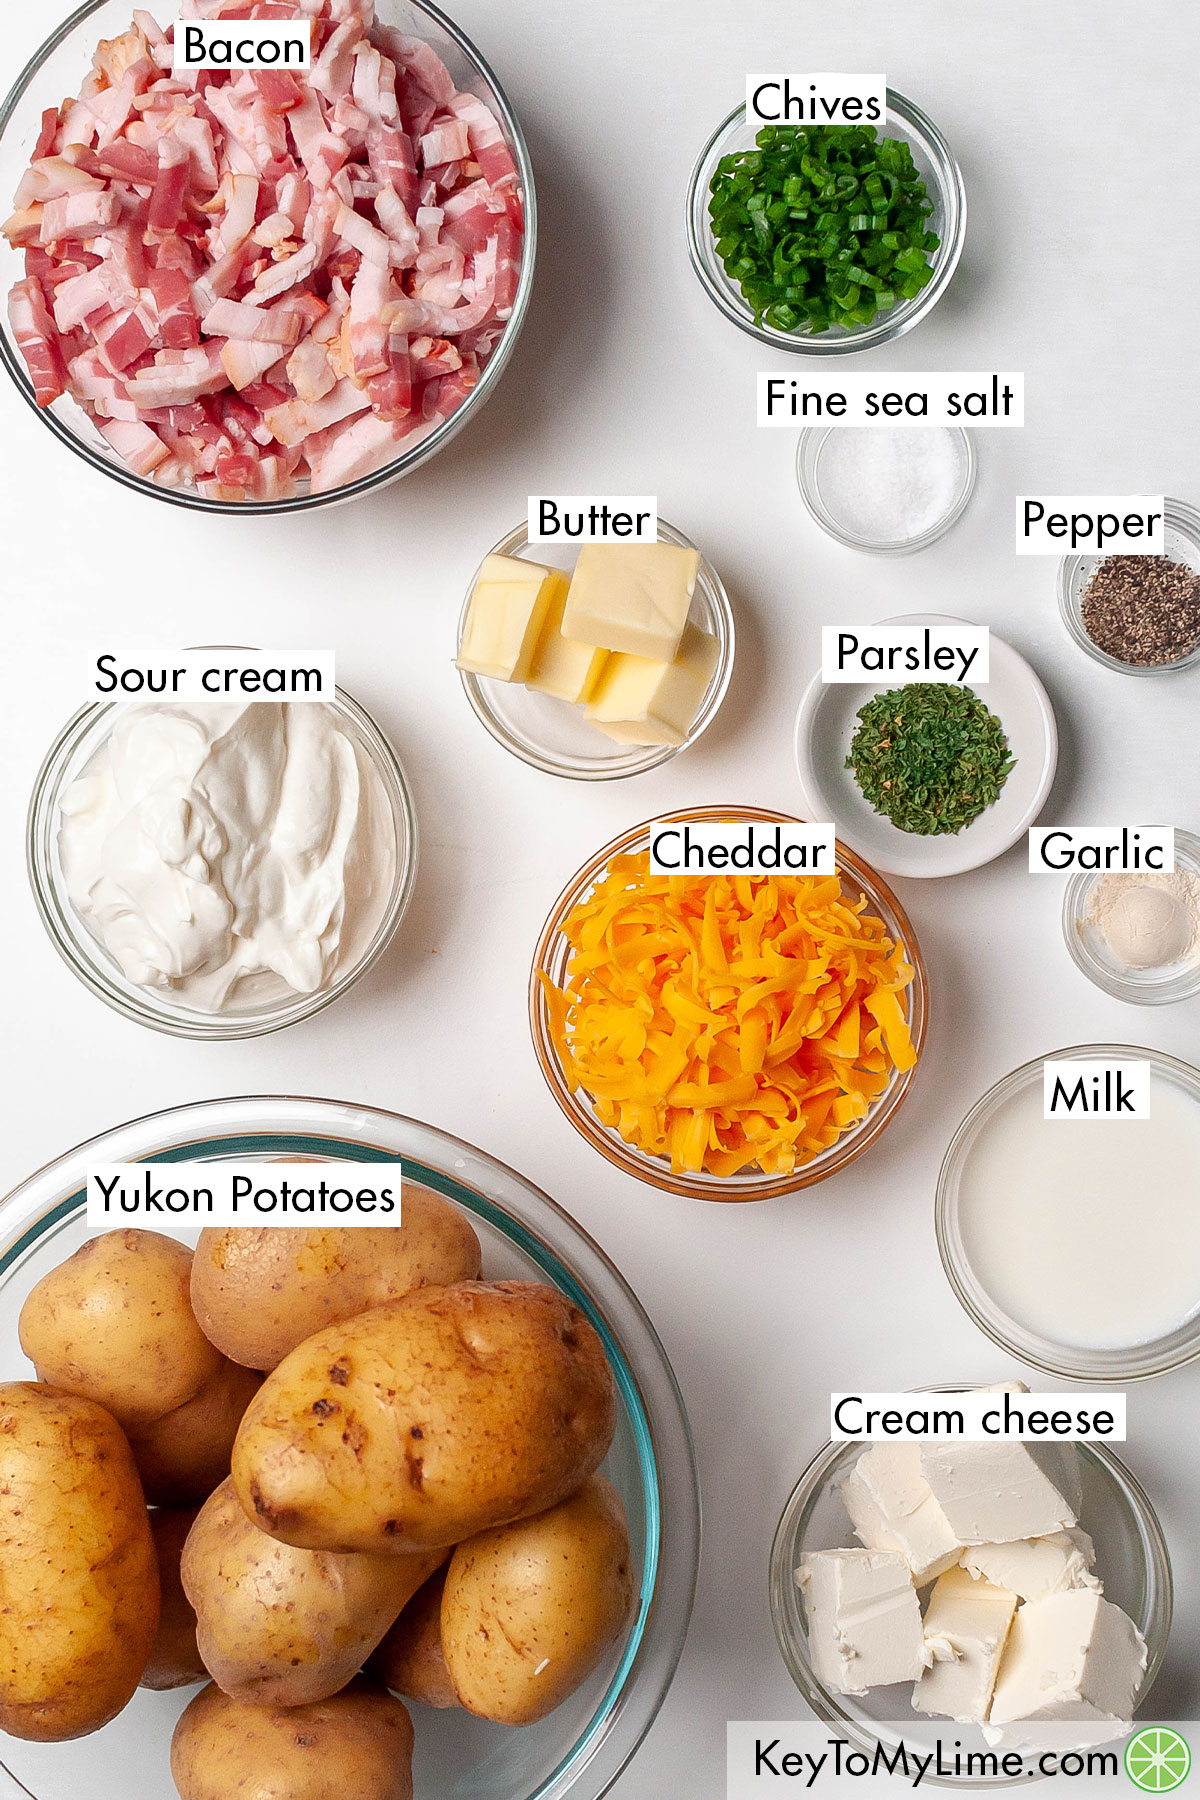 The labeled ingredients for twice baked mashed potatoes.